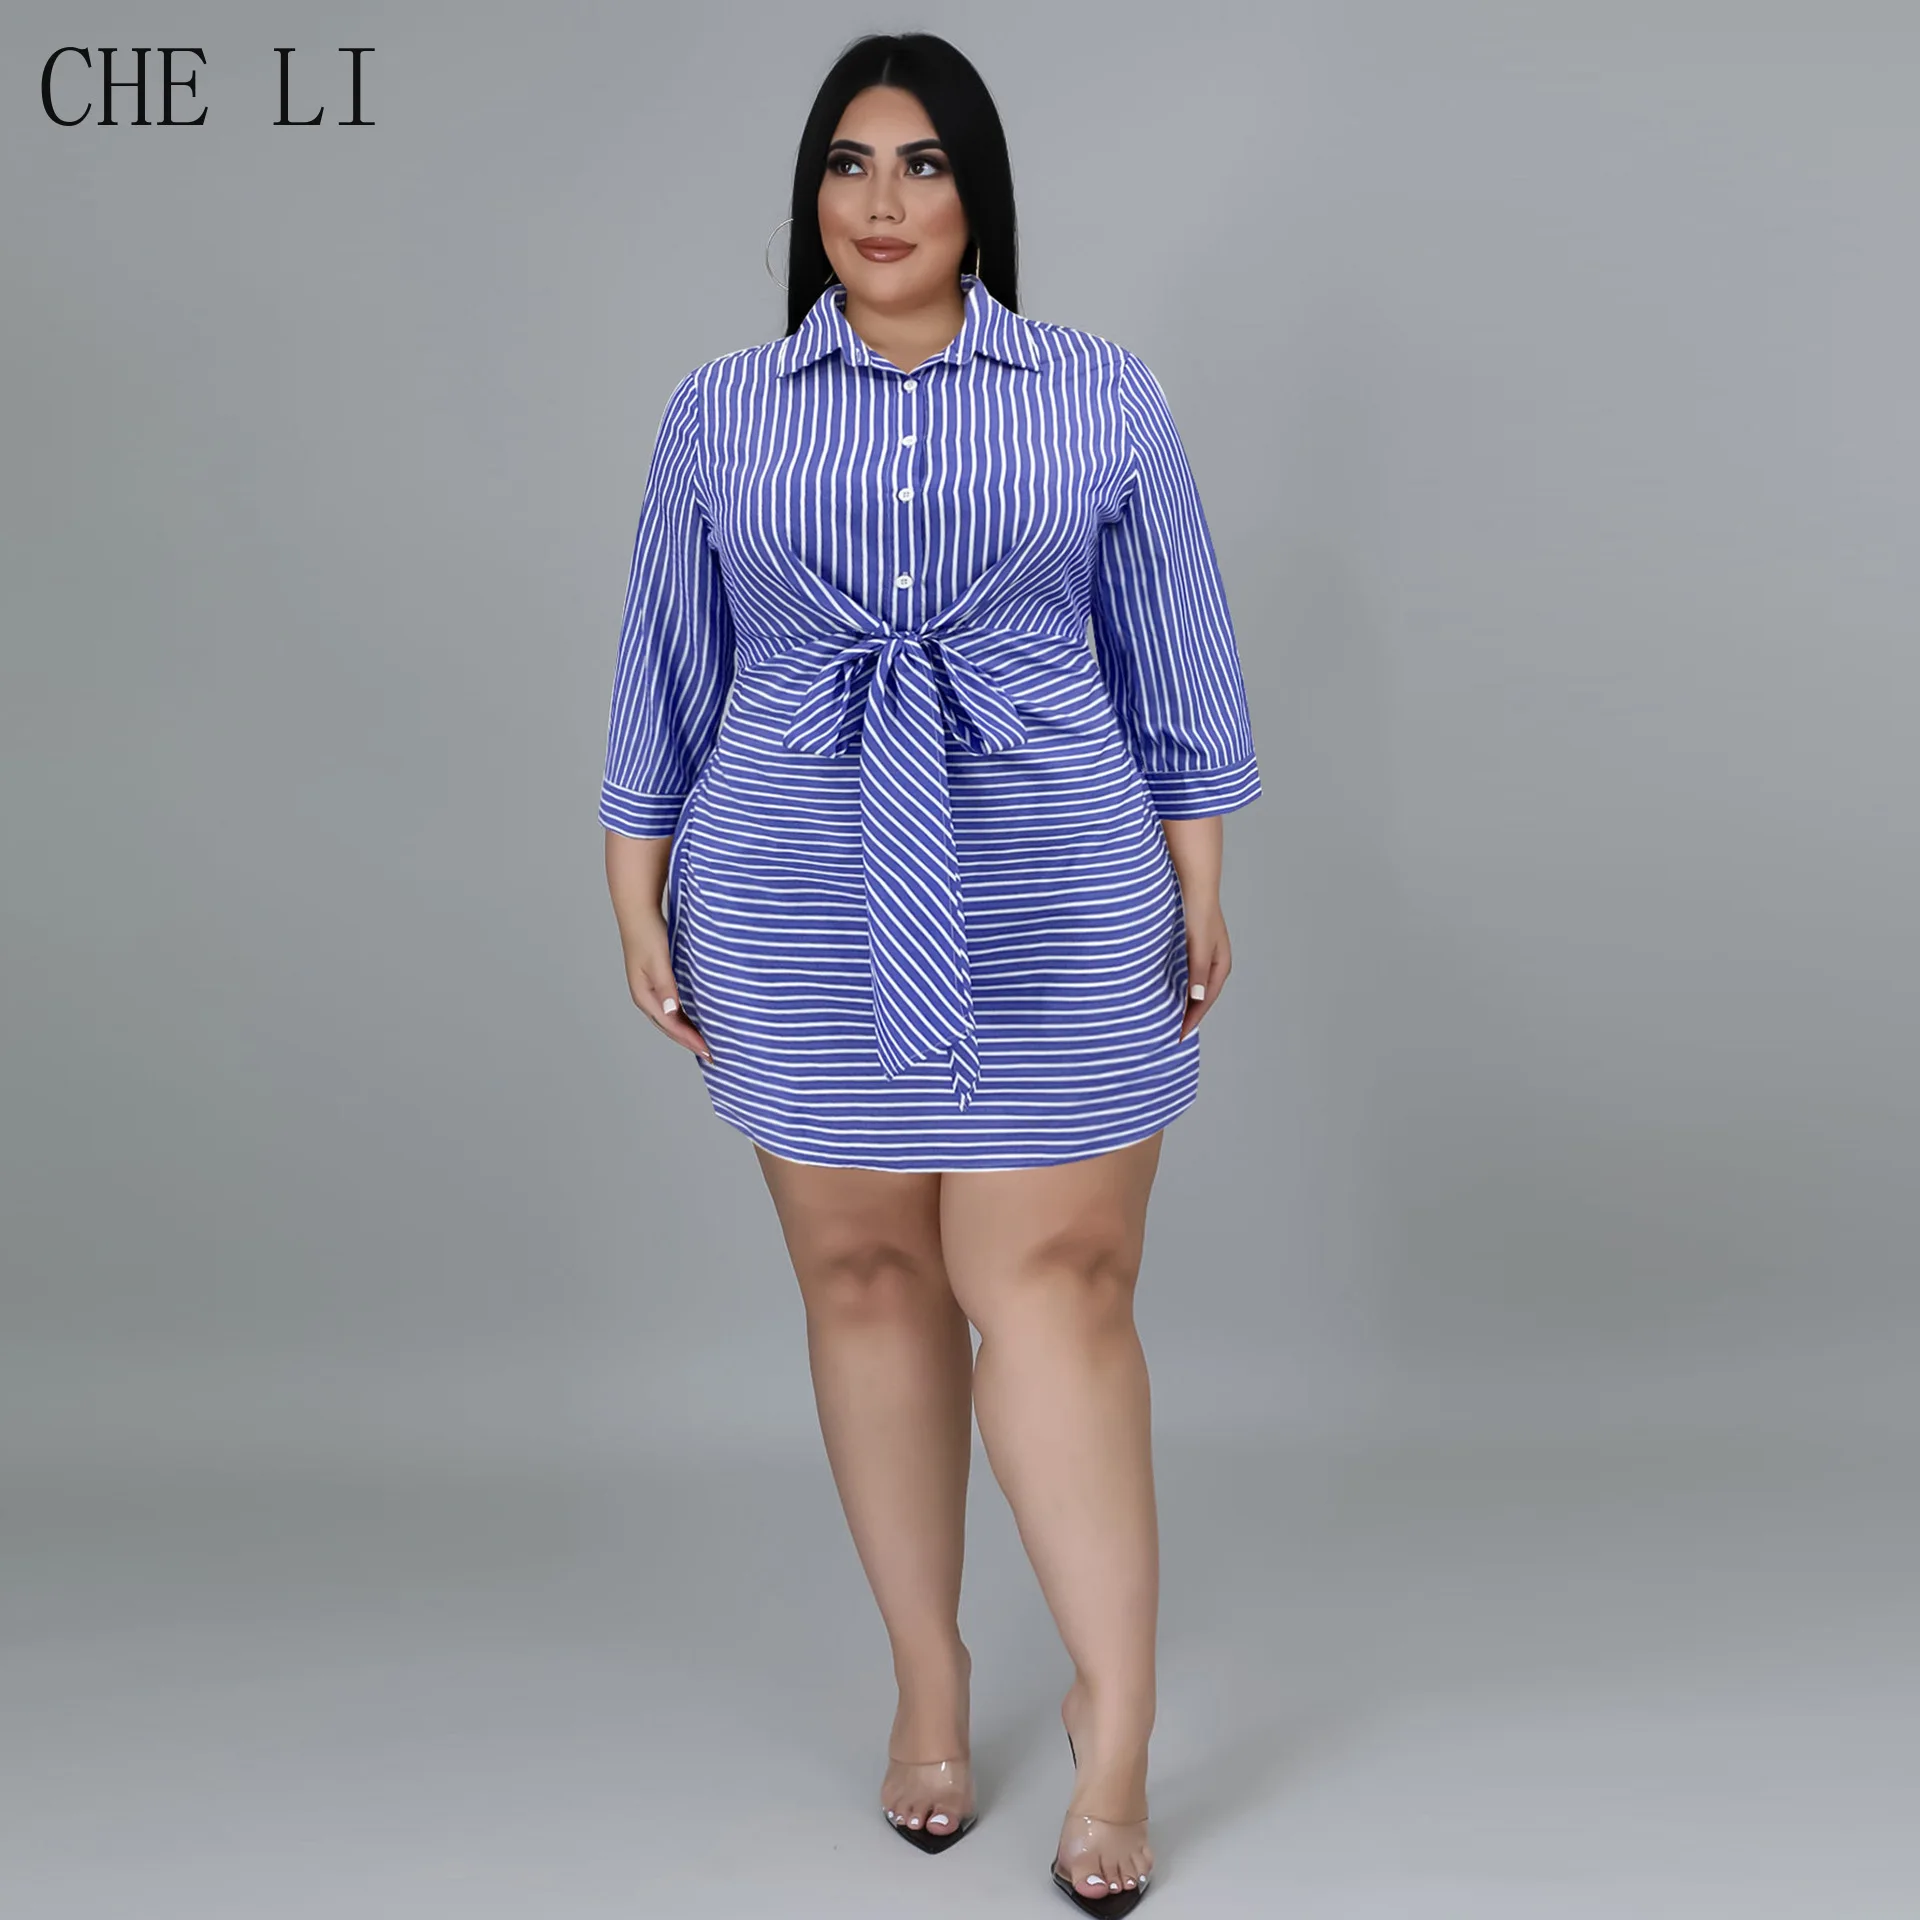 Temperament Spring and Autumn Plus Size Women's Clothing INS Sexy Waist Tie Nine-point Sleeve Lapel Striped Shirt Dress Female